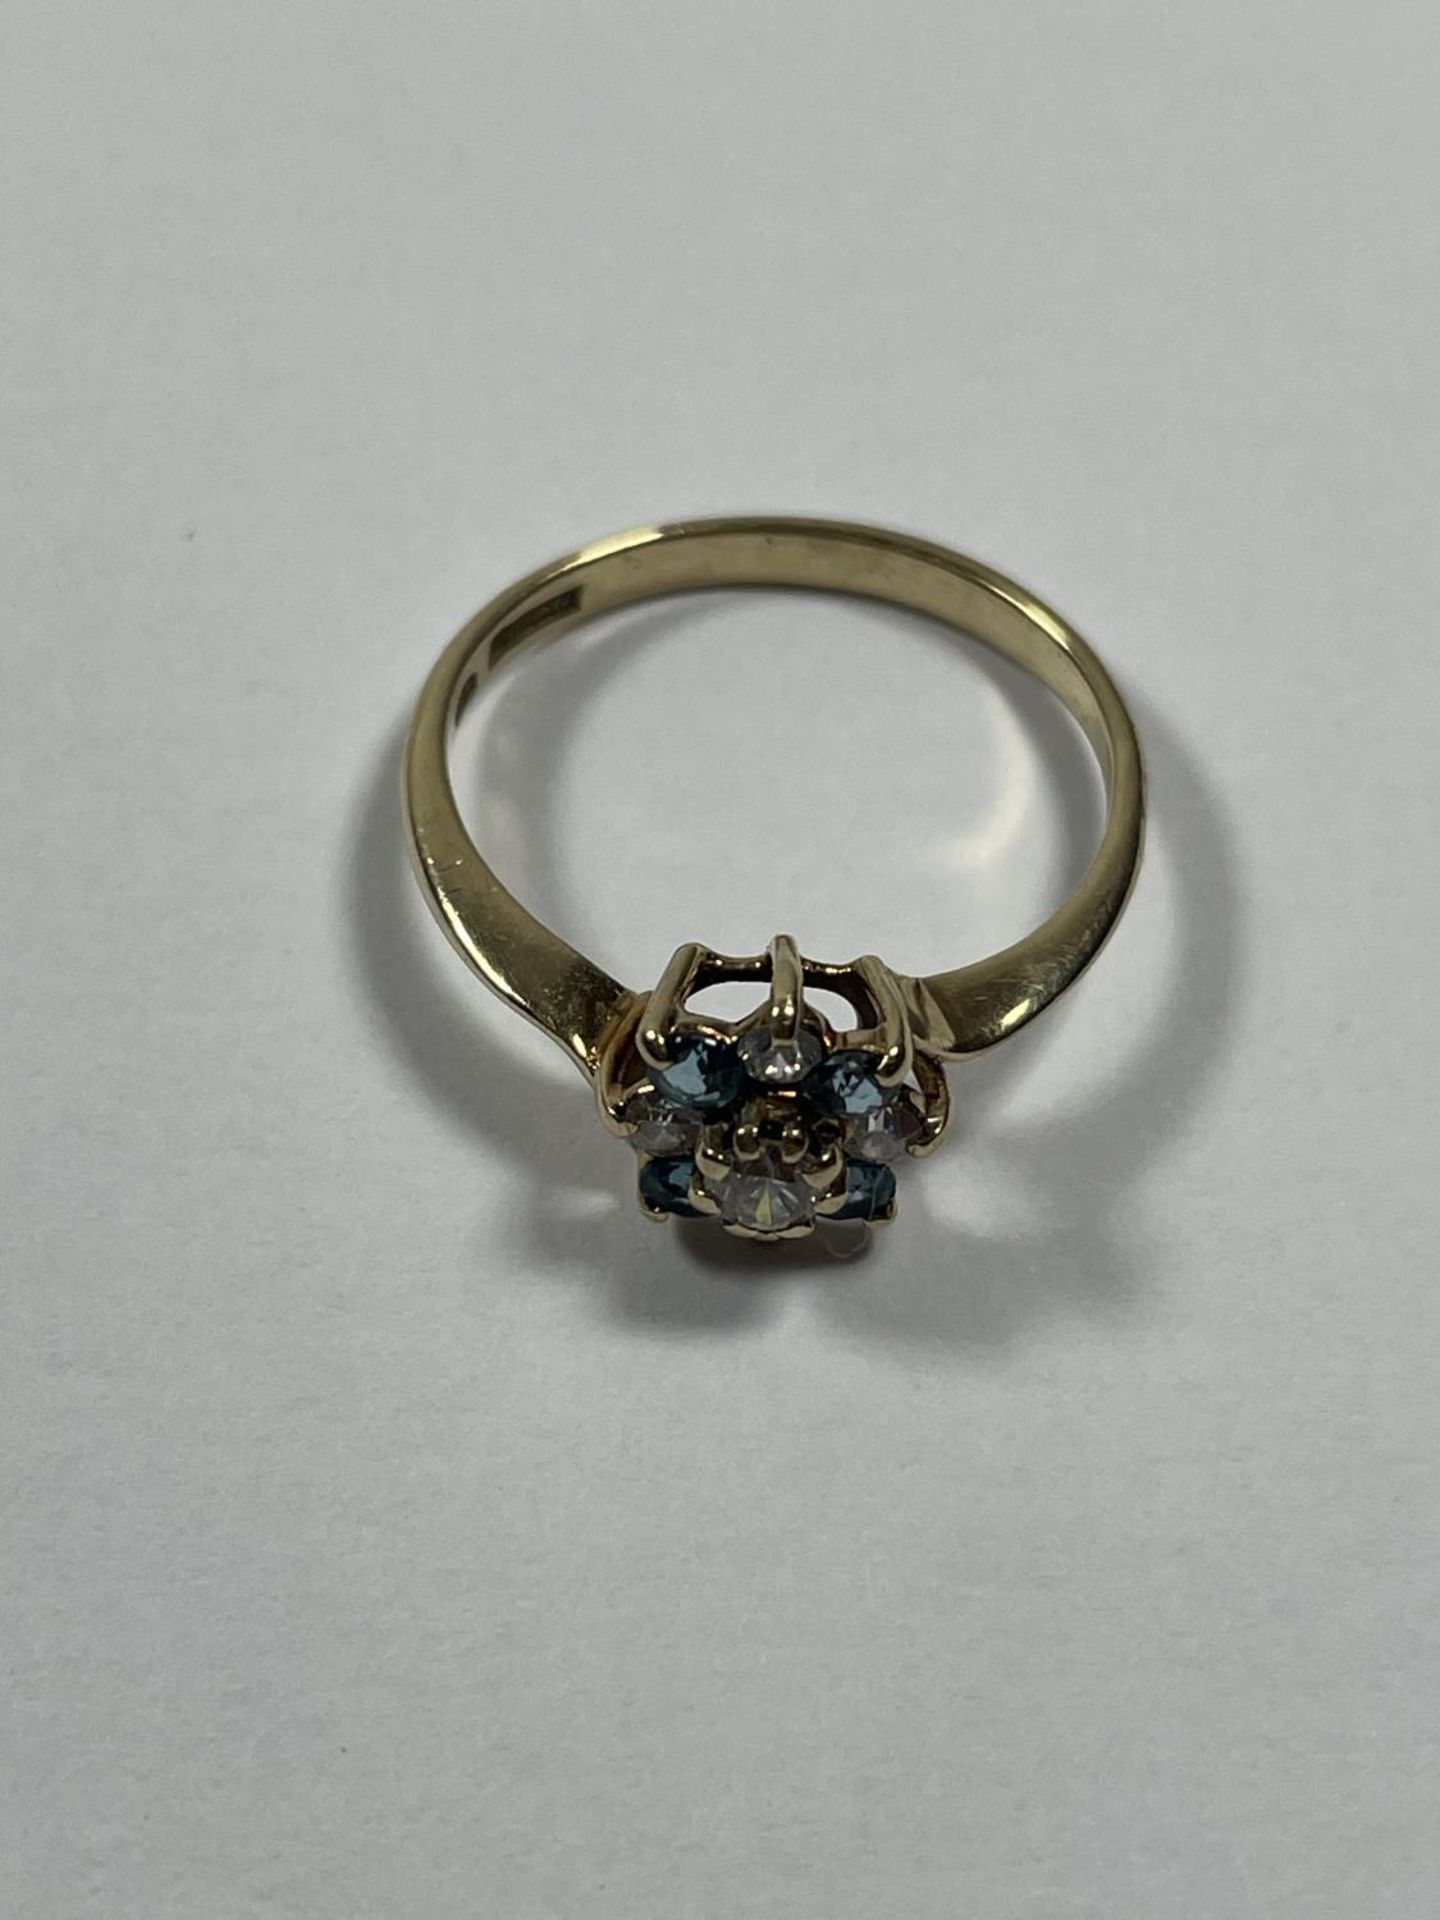 A 9 CARAT GOLD RING WITH BLUE TOPAZ AND CUBIC ZIRCONIAS IN A FLOWER DESIGN SIZE P